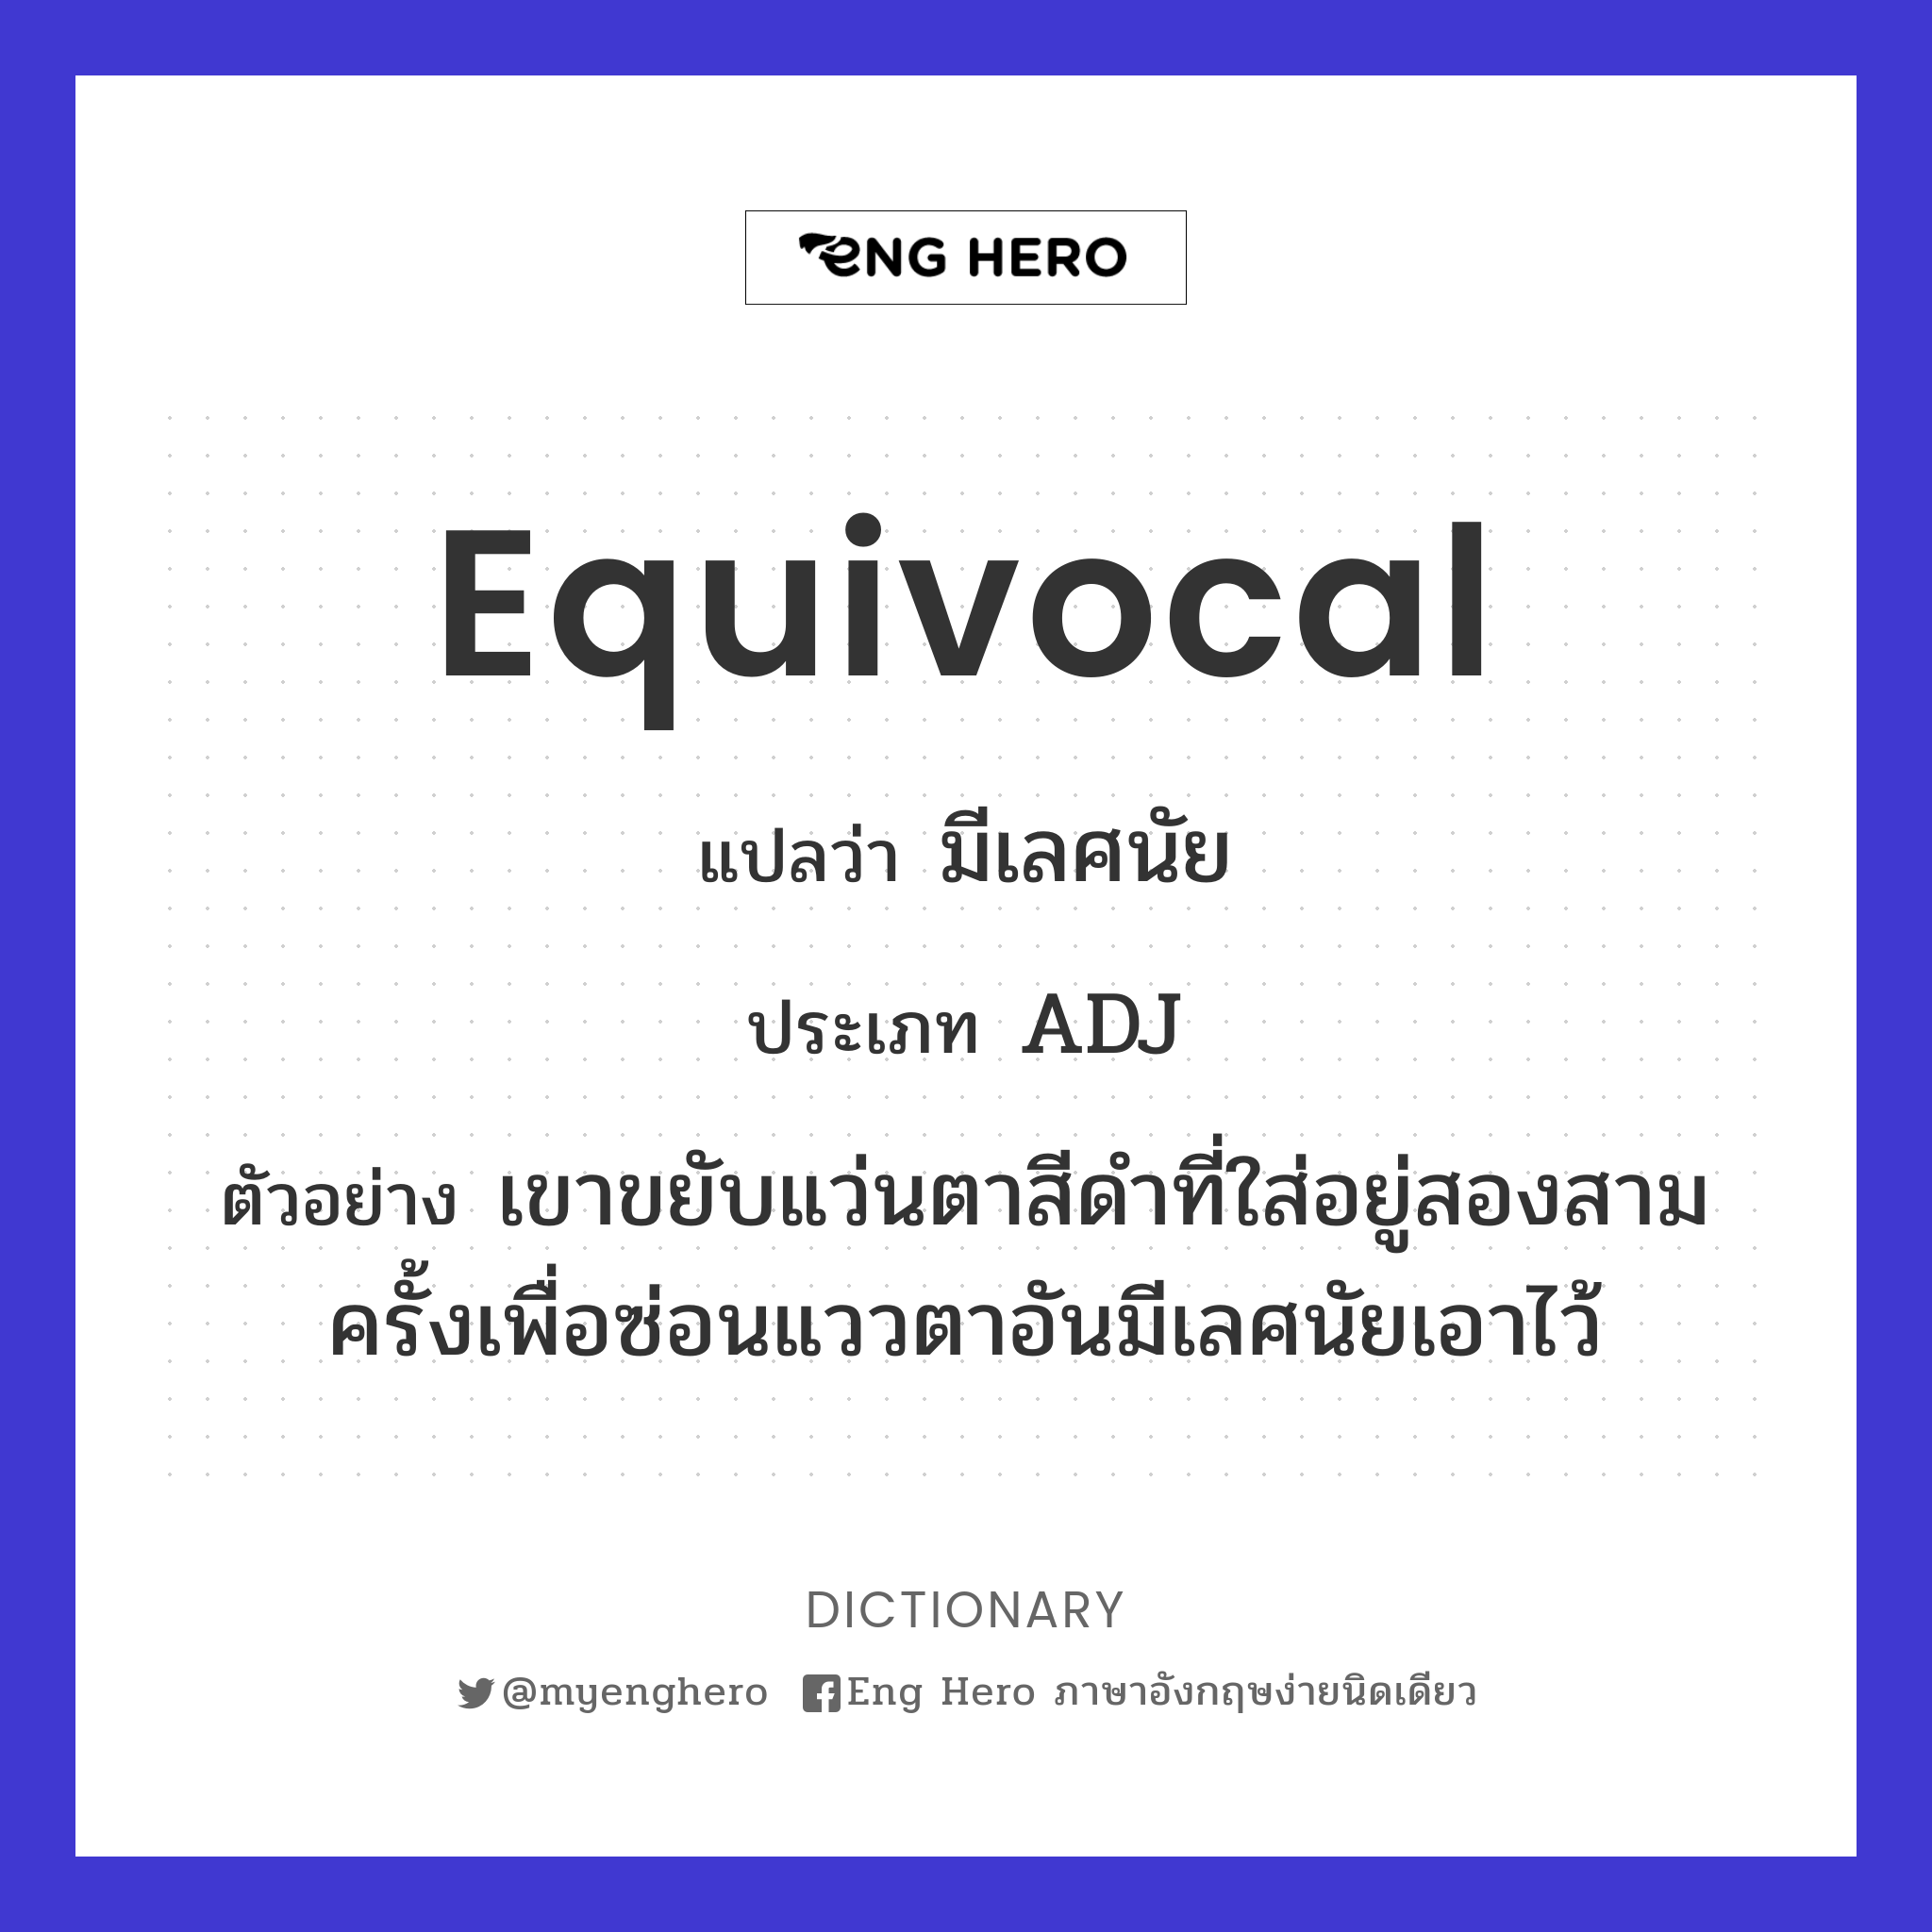 equivocal